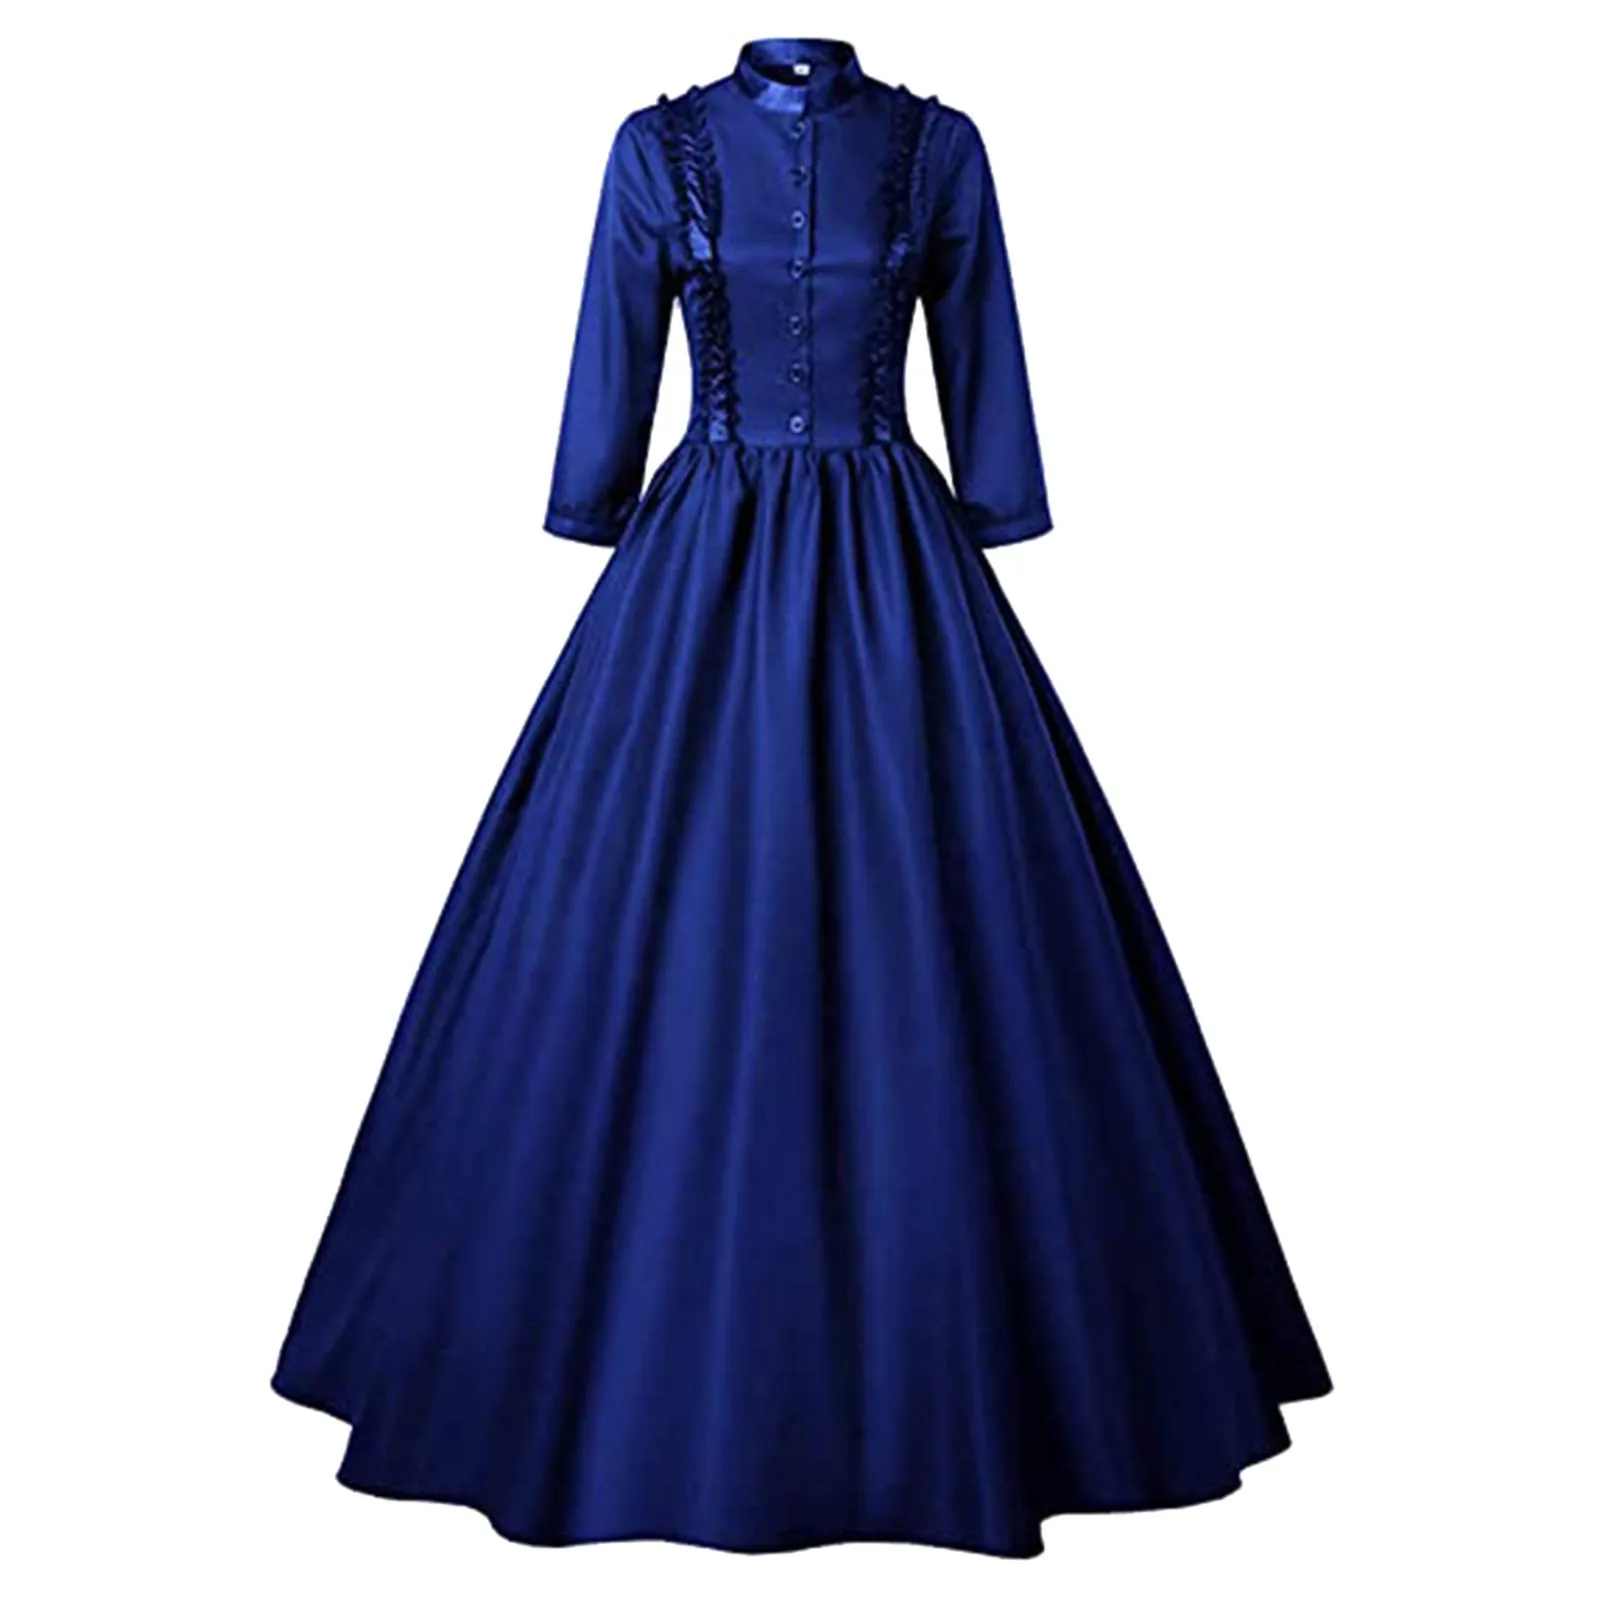 

Women's Medieval Gothic Dress Renaissance Queen Masquerade Cocktail Party Dress Long Sleeve A Line Swing Gowns Halloween Costume